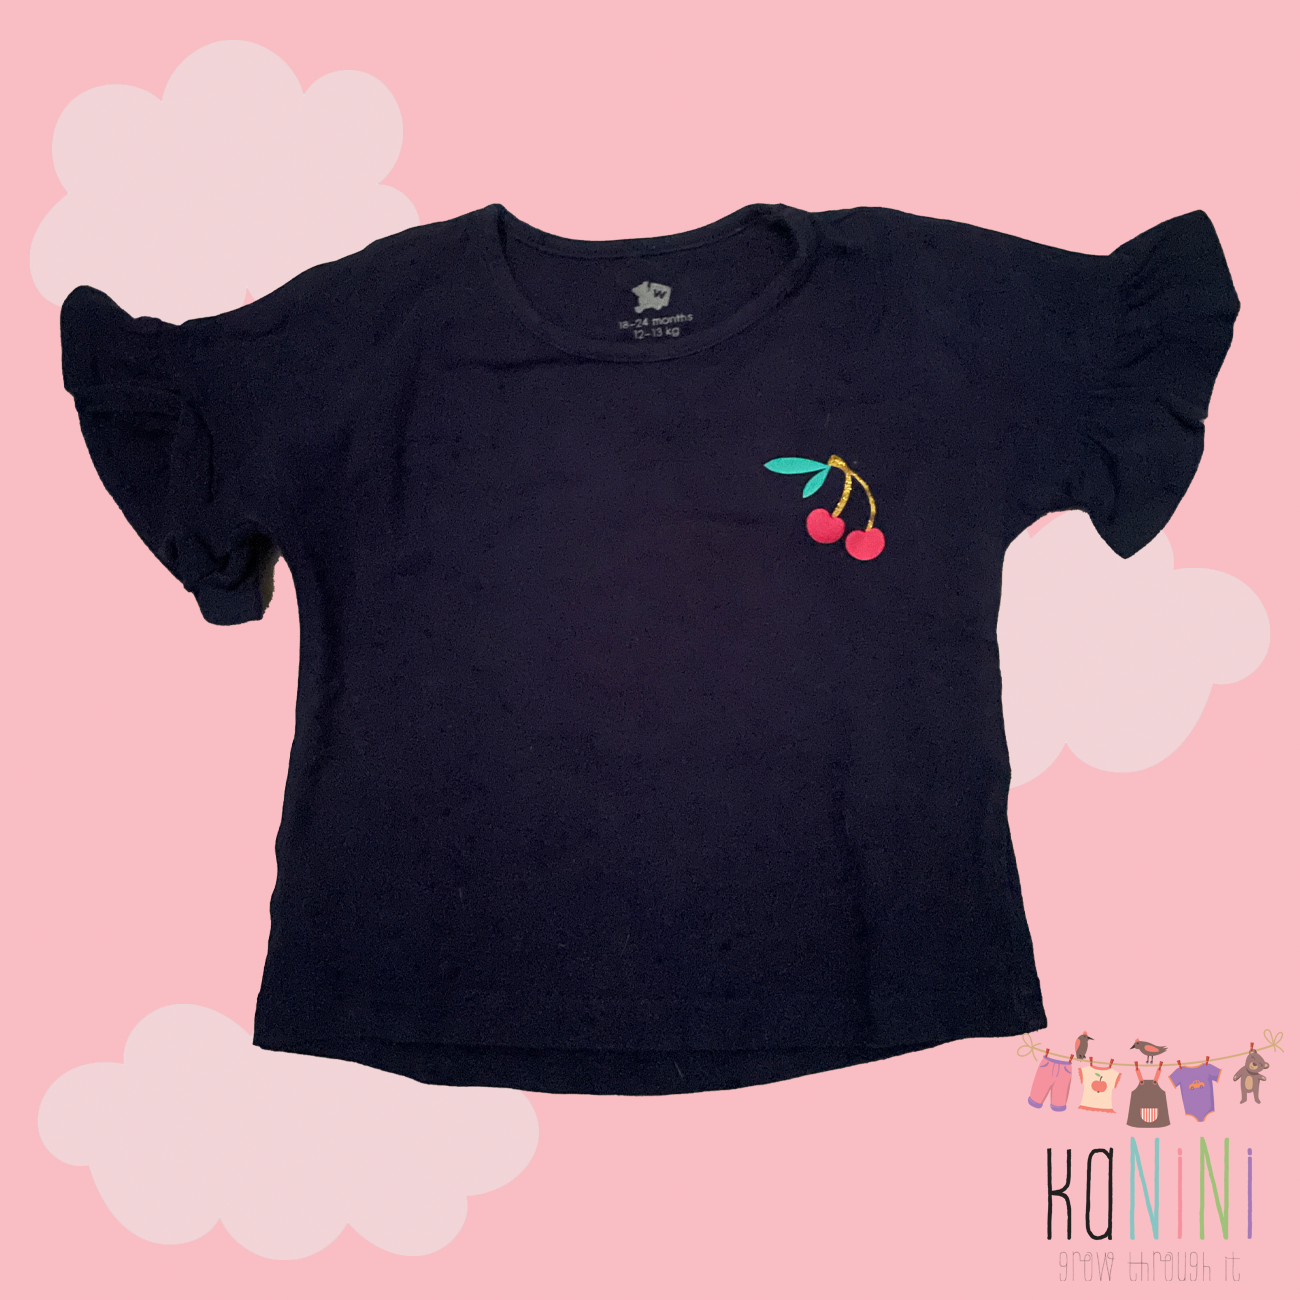 Featured image for “Woolworths 18 - 24 Months Girls Navy T-Shirt”